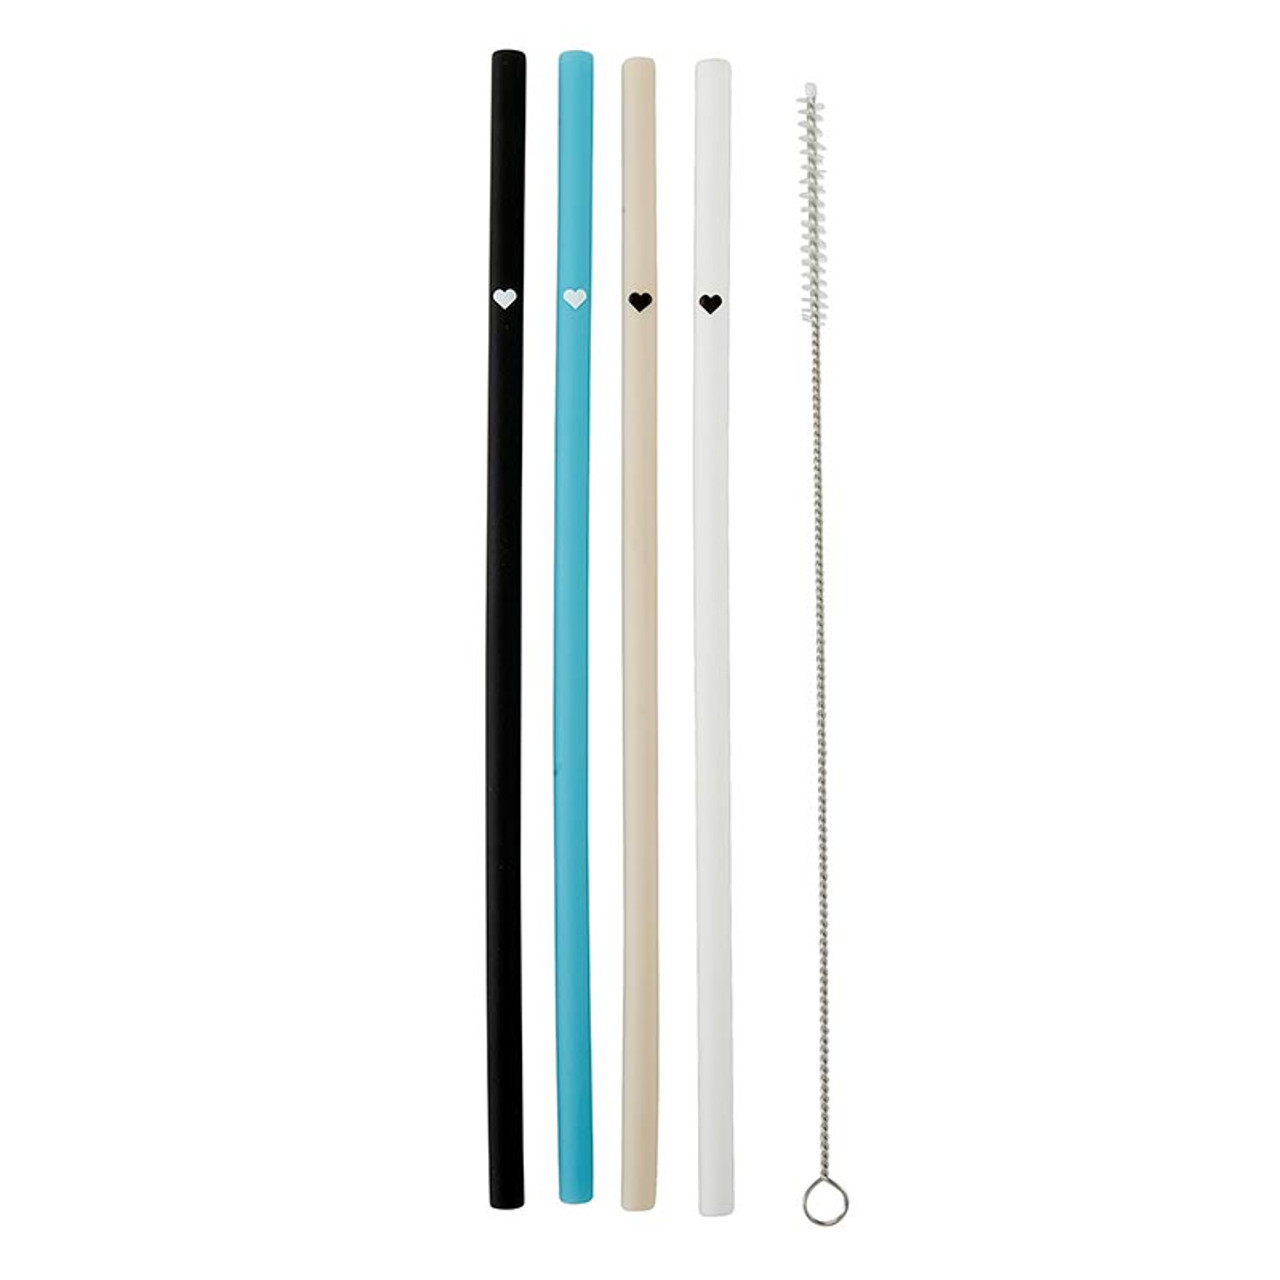 Reusable Silicone Straws with Straw Charms